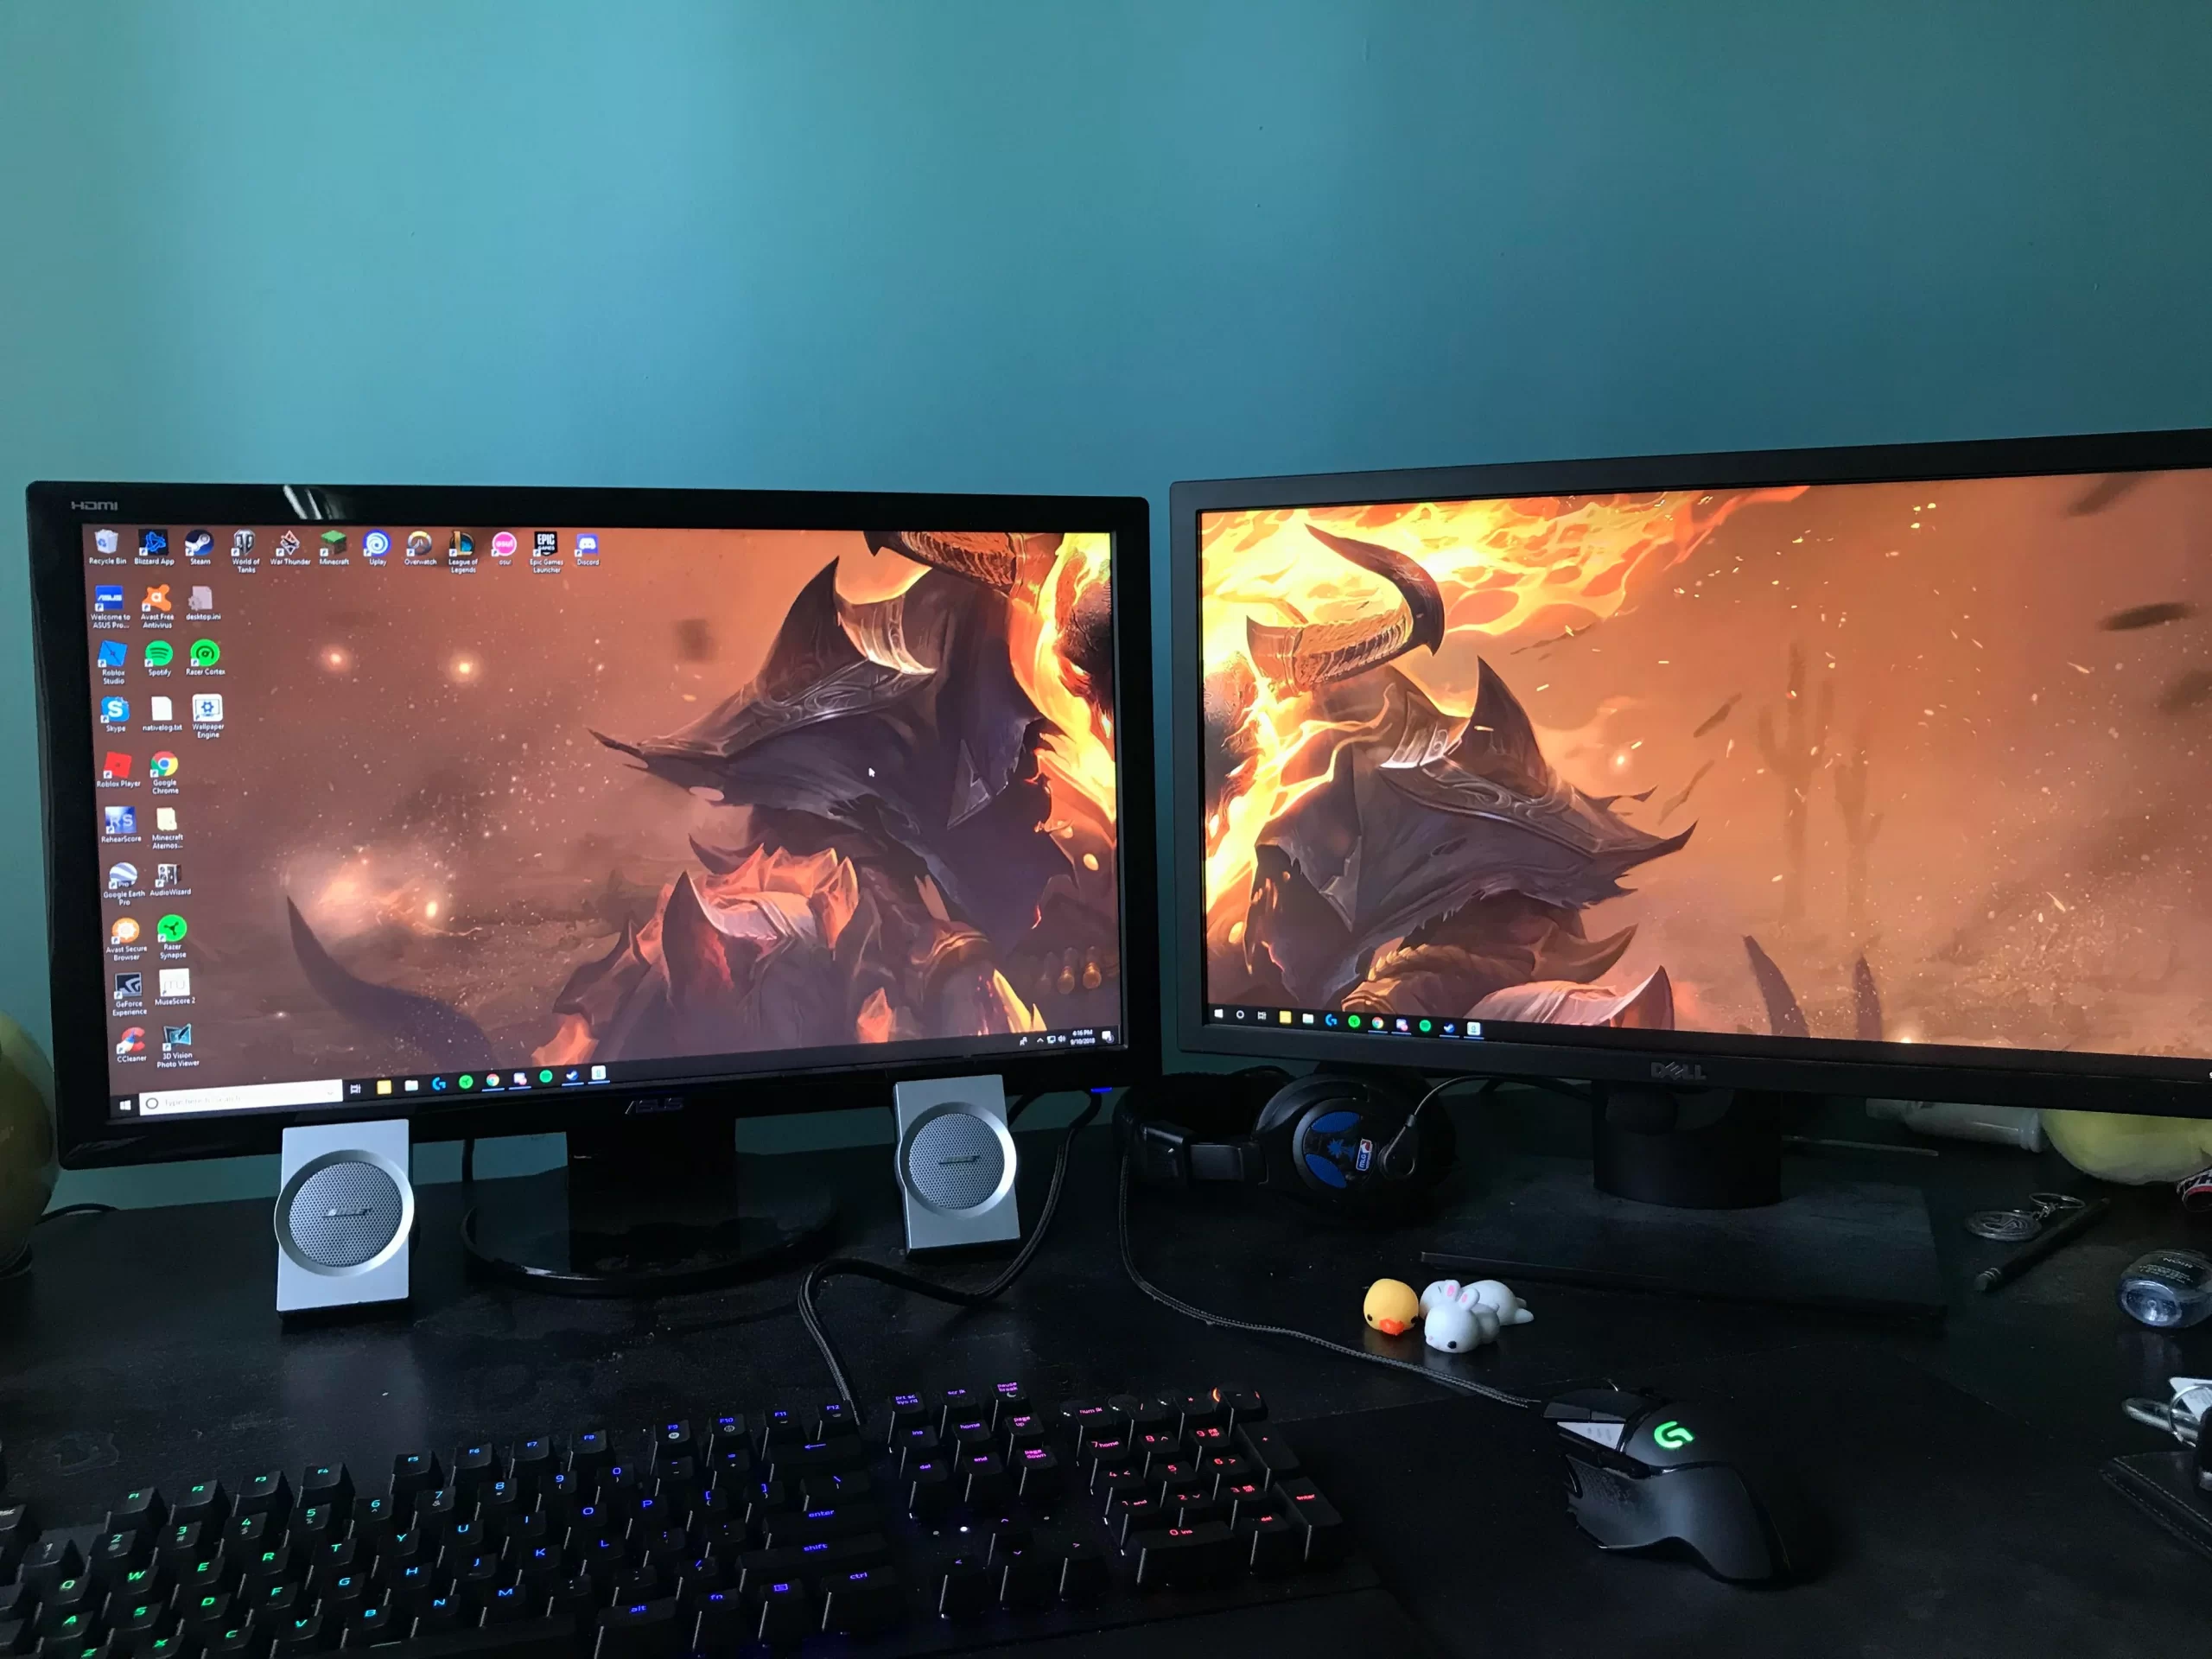 Wallpaper Engine Not Working on Second monitor